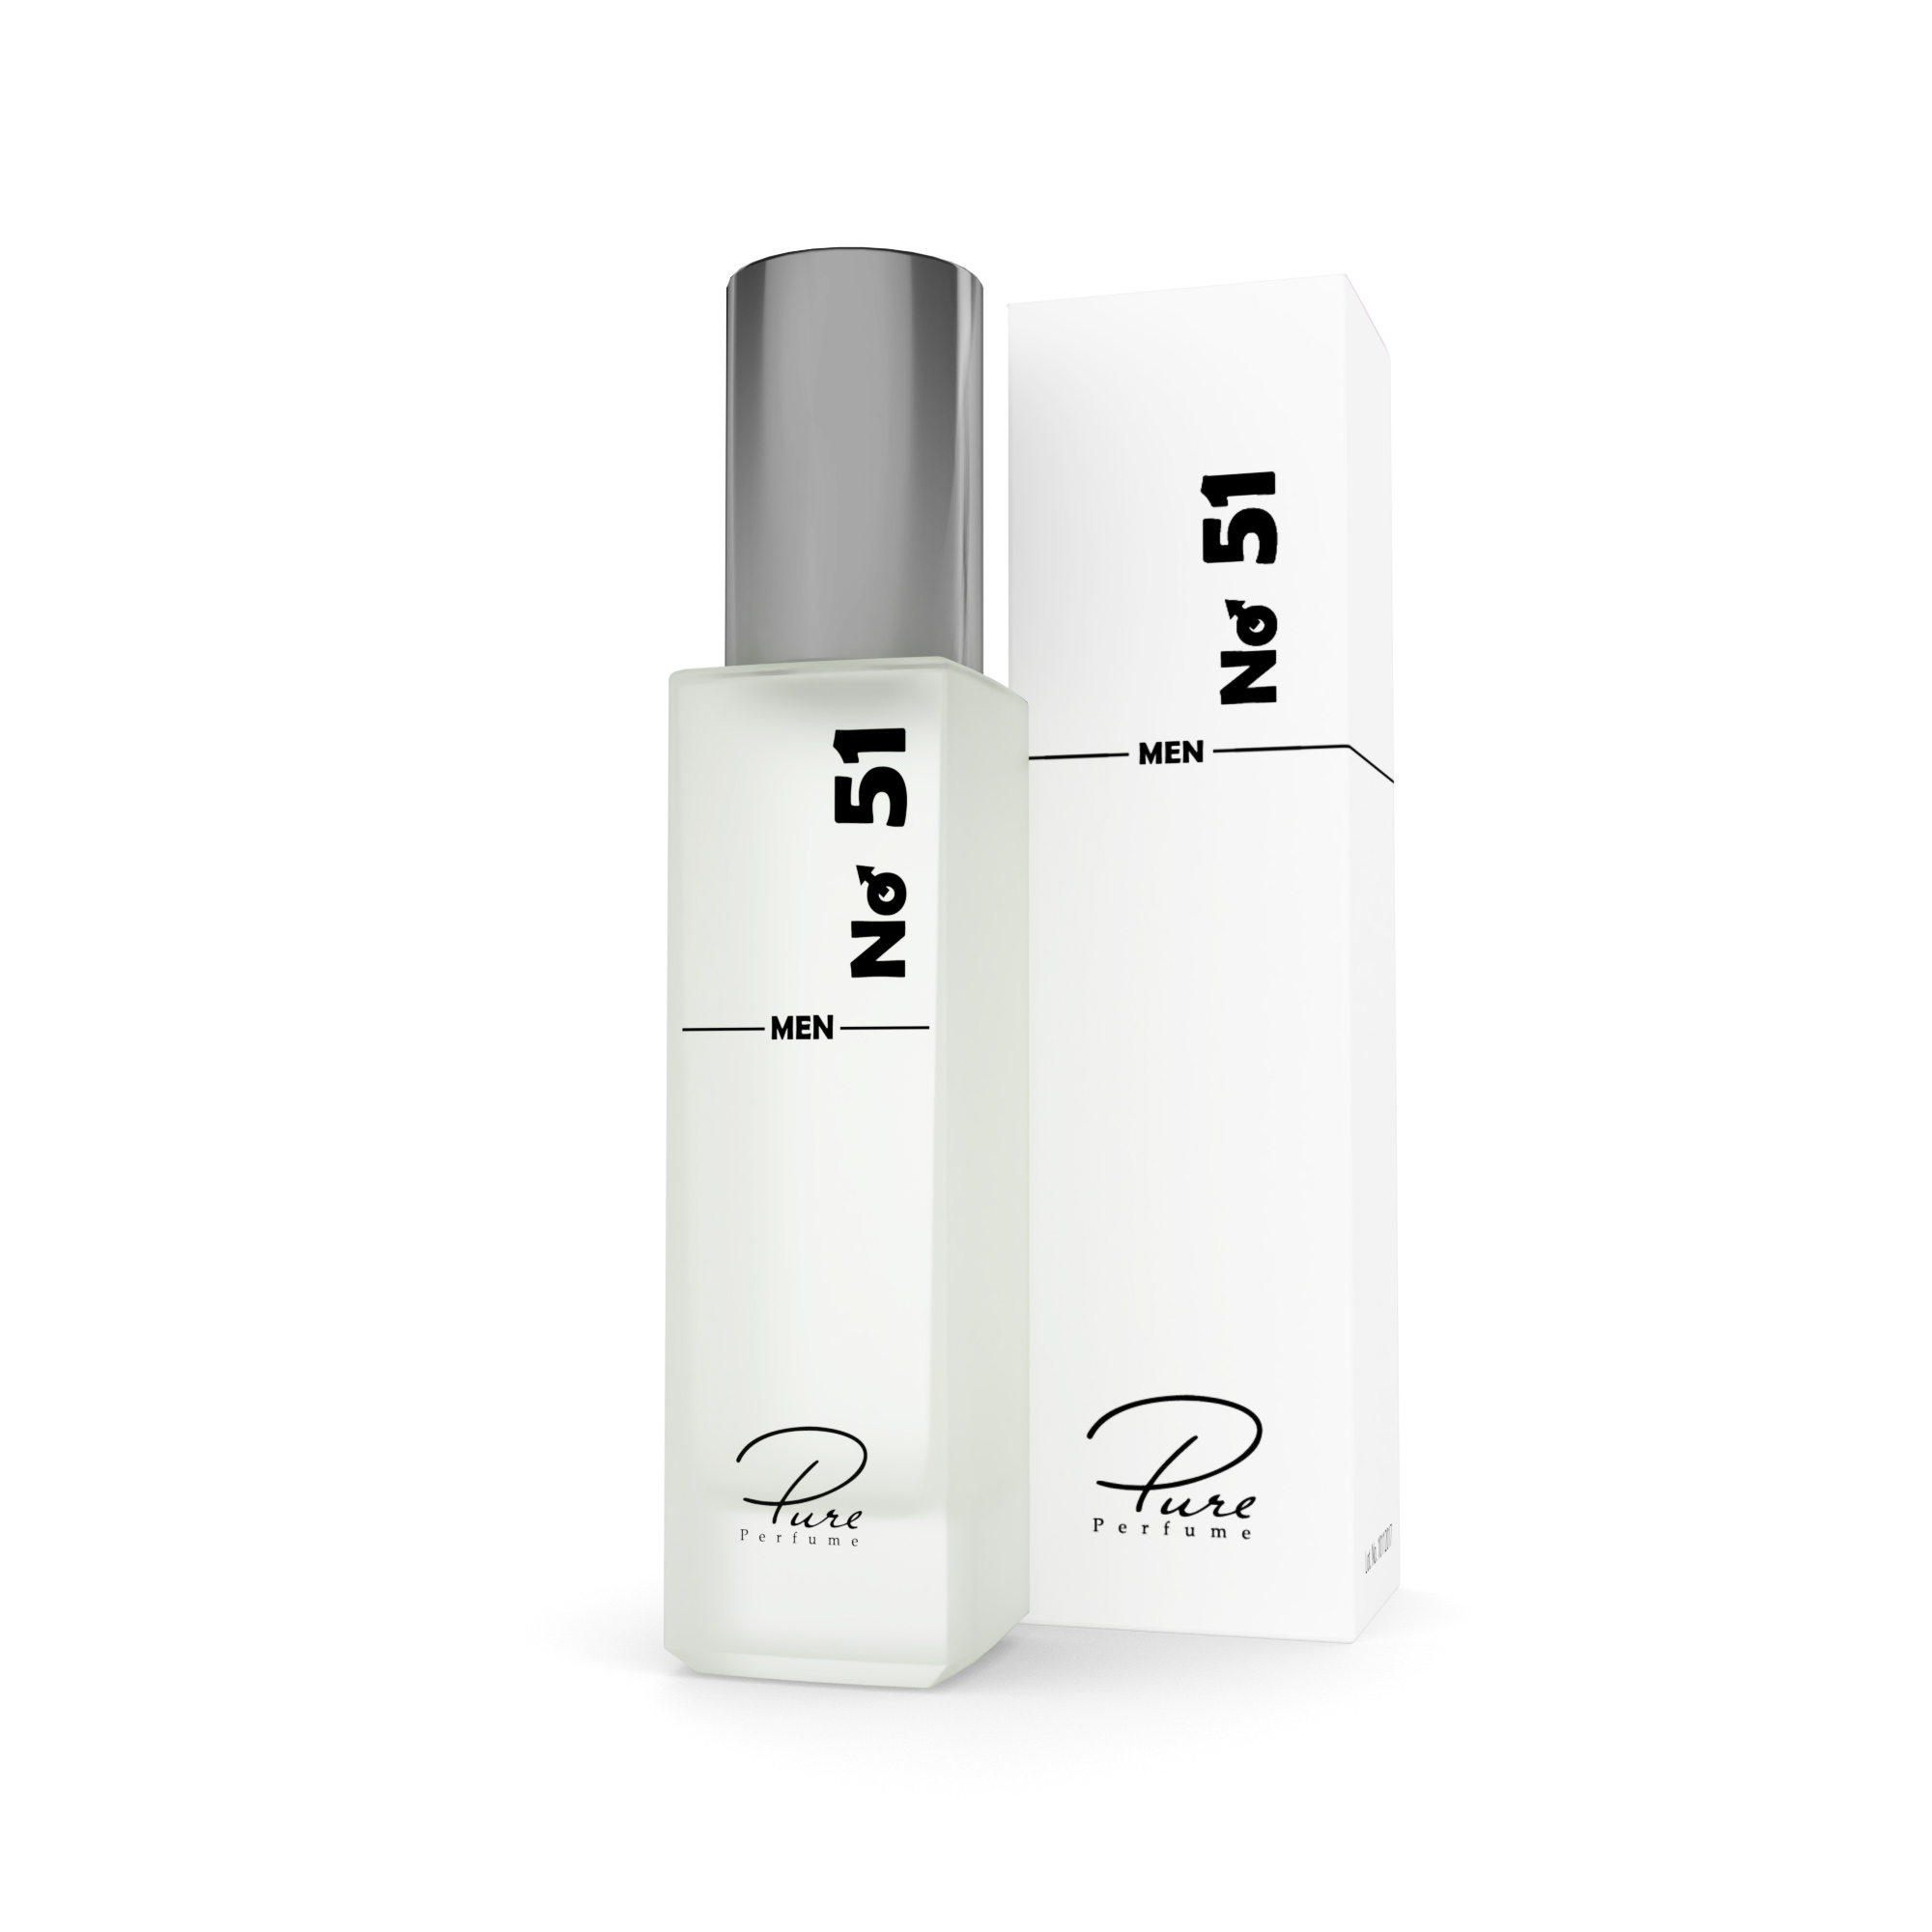 Parfum no 51 - wood and water perfume for men 15 ml